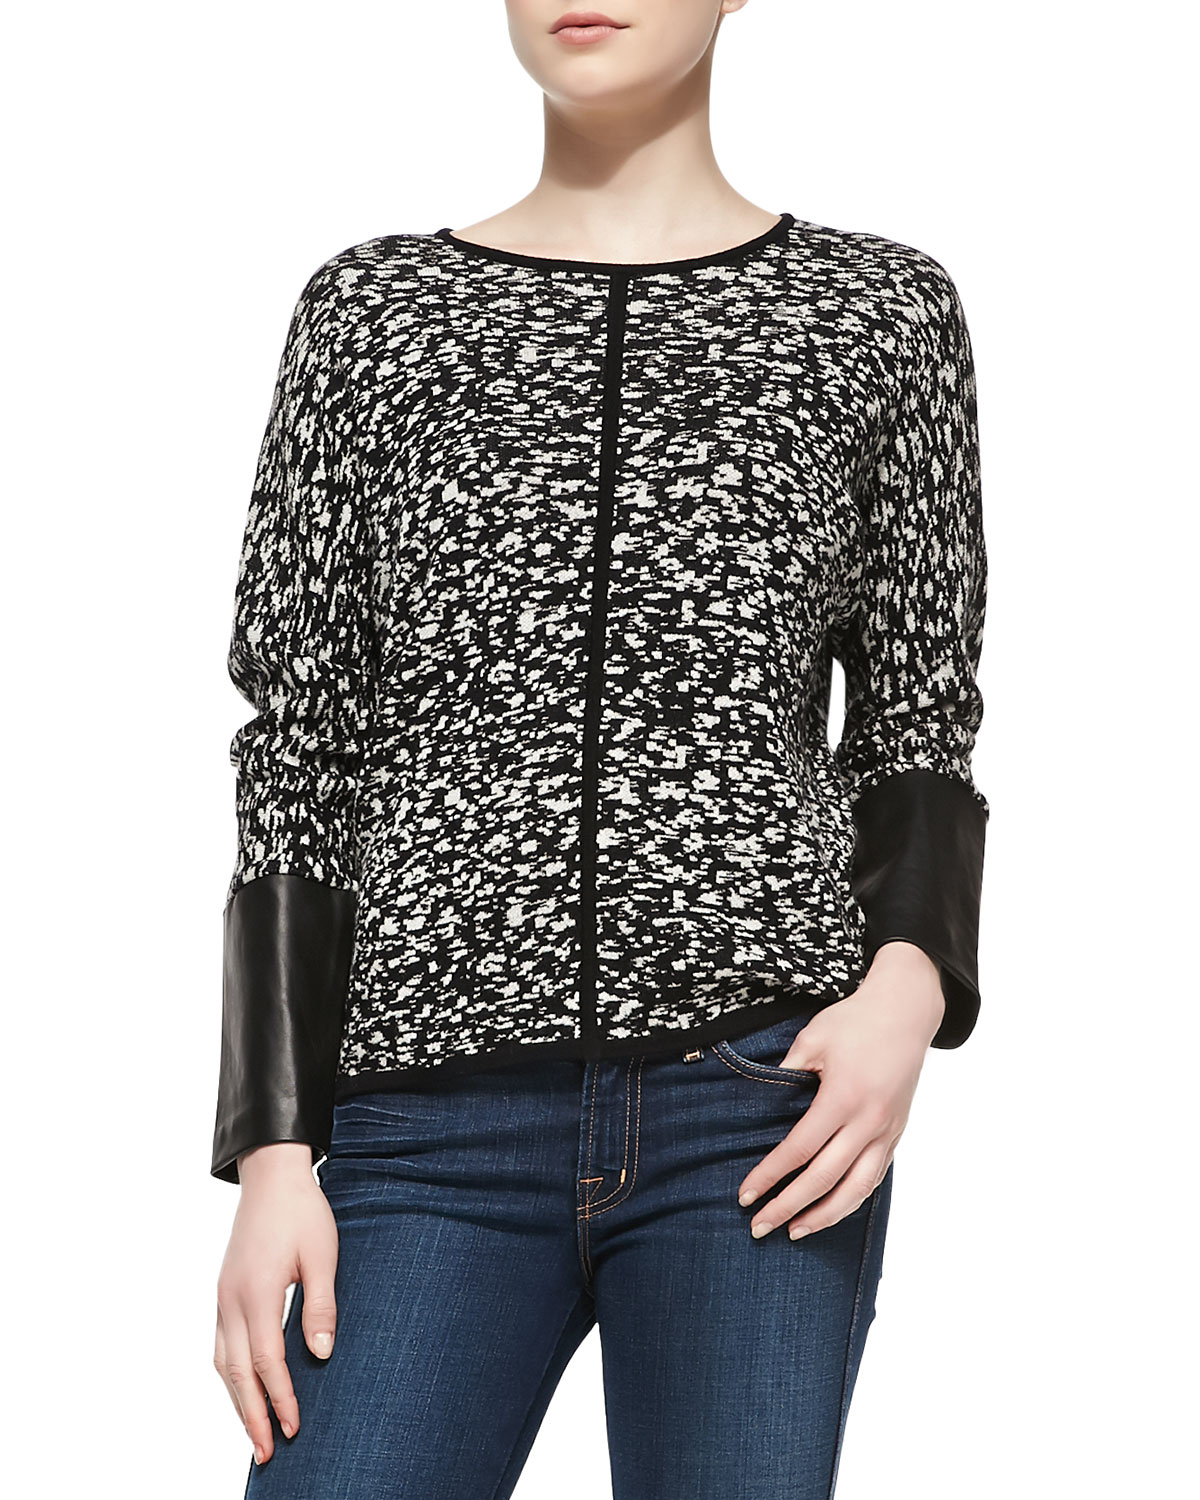 Lyst - Belford Jacquard Sweater With Leather Cuffs in Black